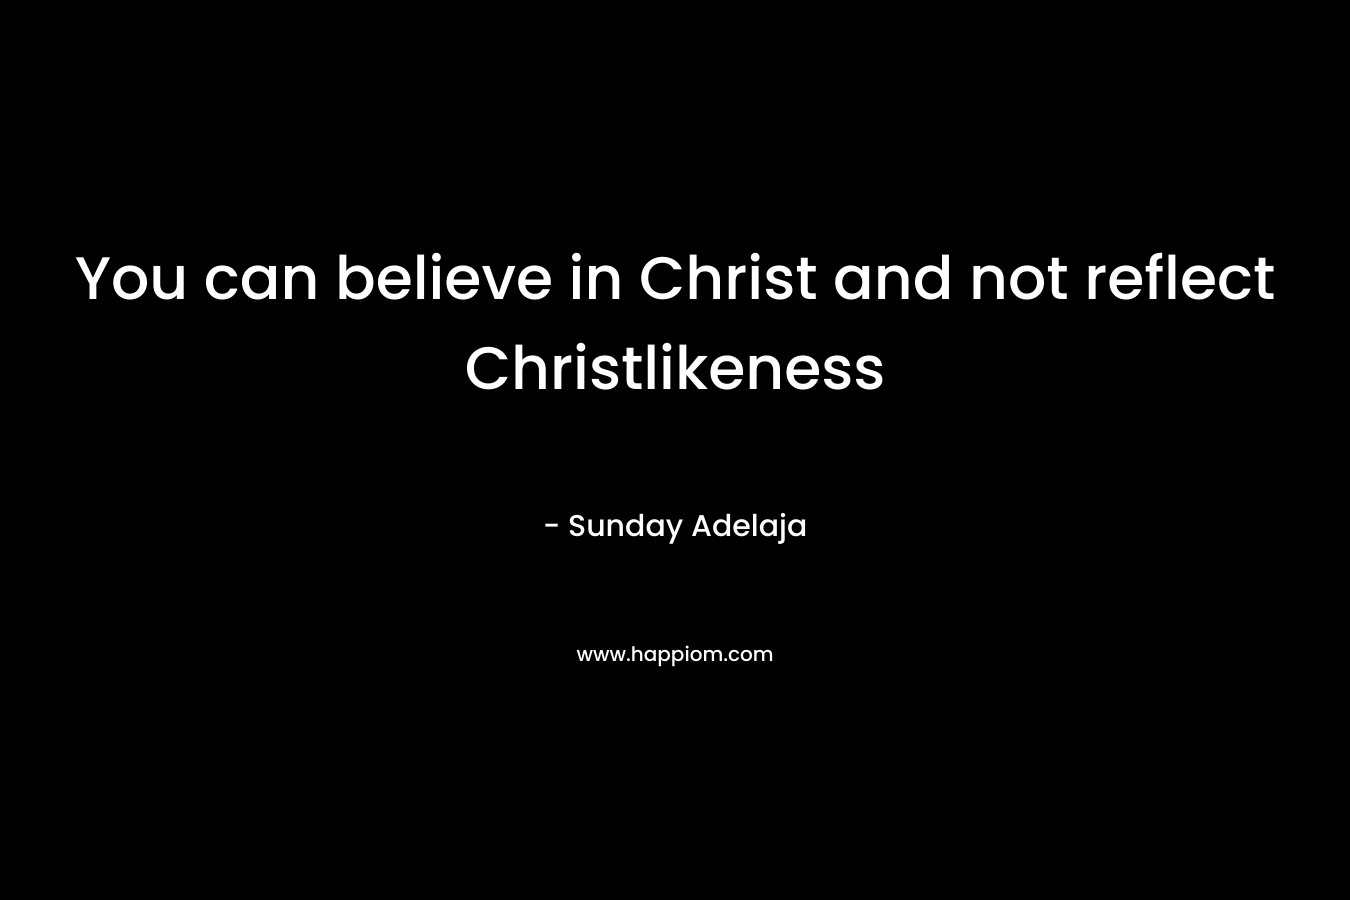 You can believe in Christ and not reflect Christlikeness